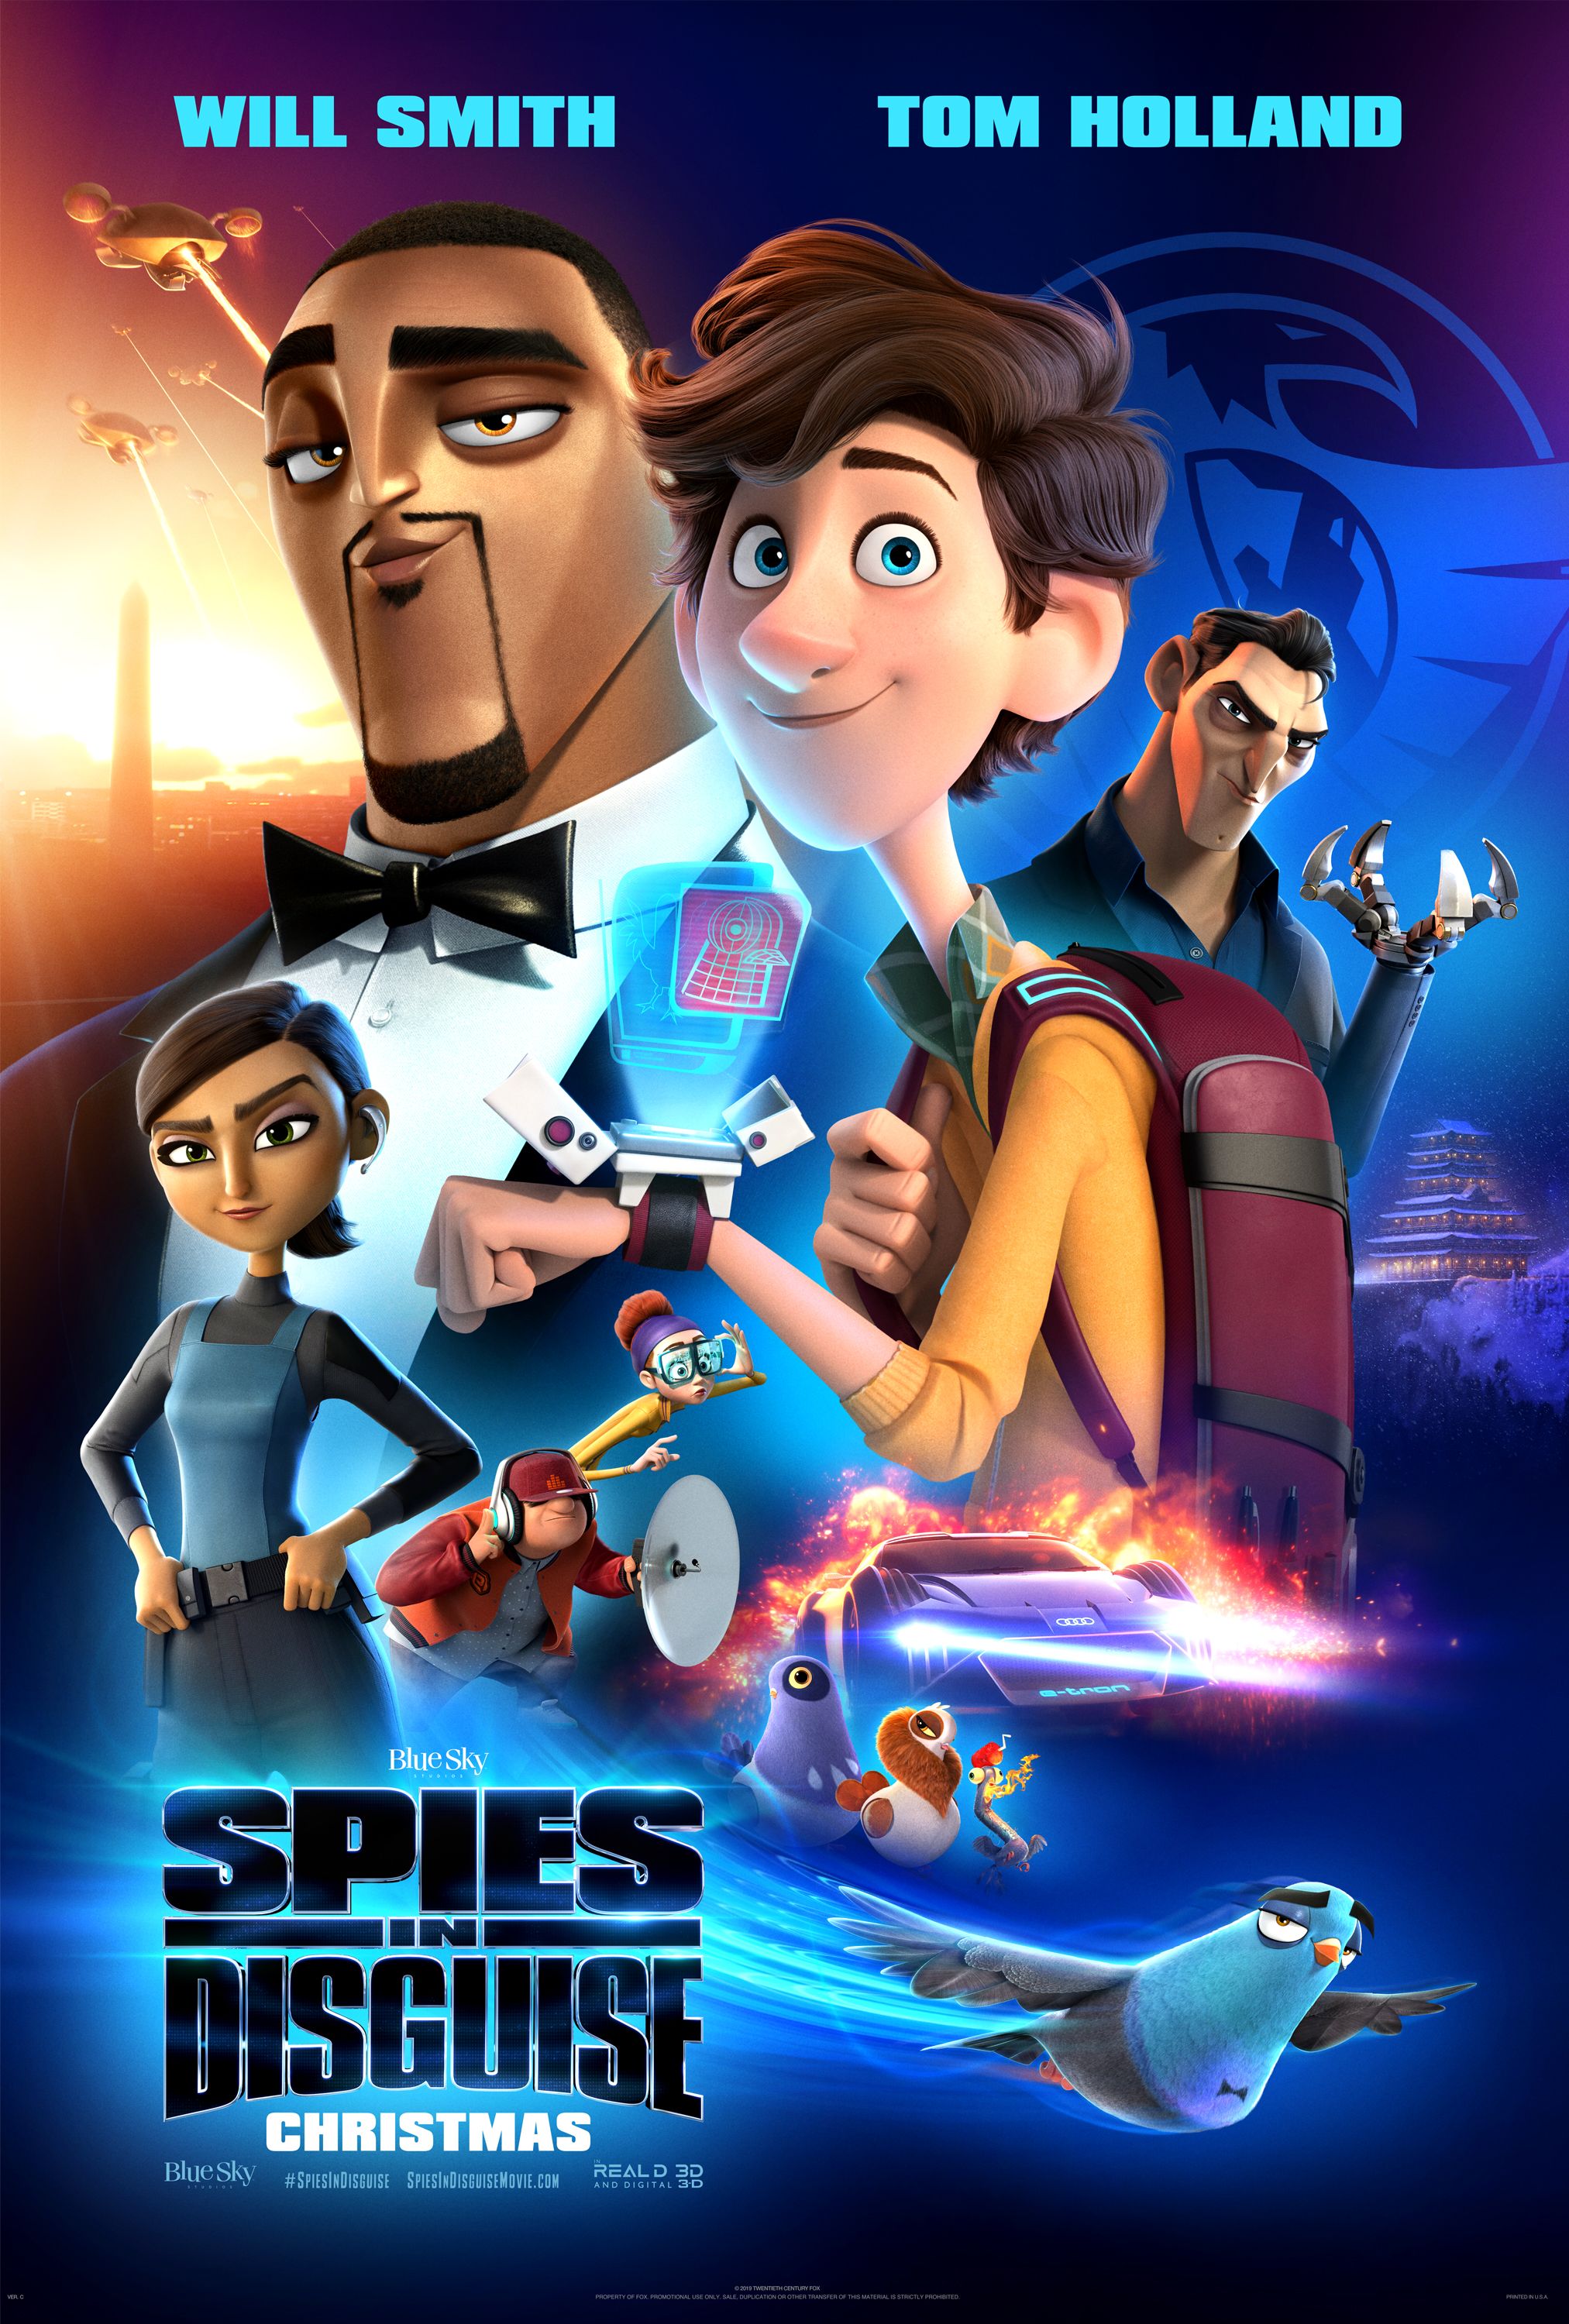 Spies in Disguise: New Trailer Reveals Will Smith & Tom Holland's Movie | Collider